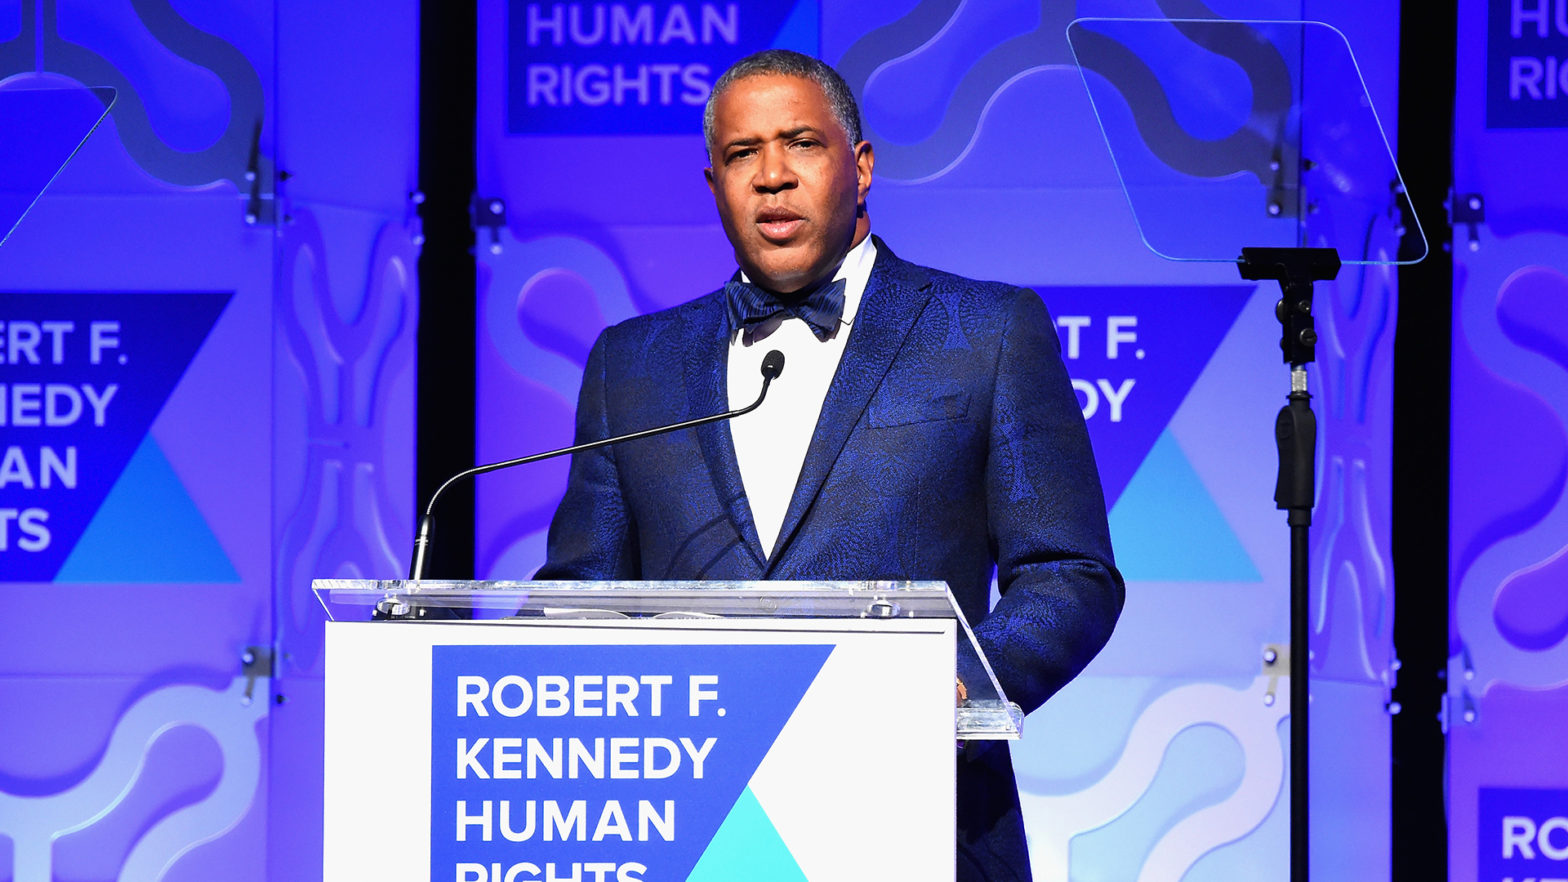 Robert F. Smith Gifts $15M To His Alma Mater Cornell University To Support Underserved Students Pursuing Careers In STEM